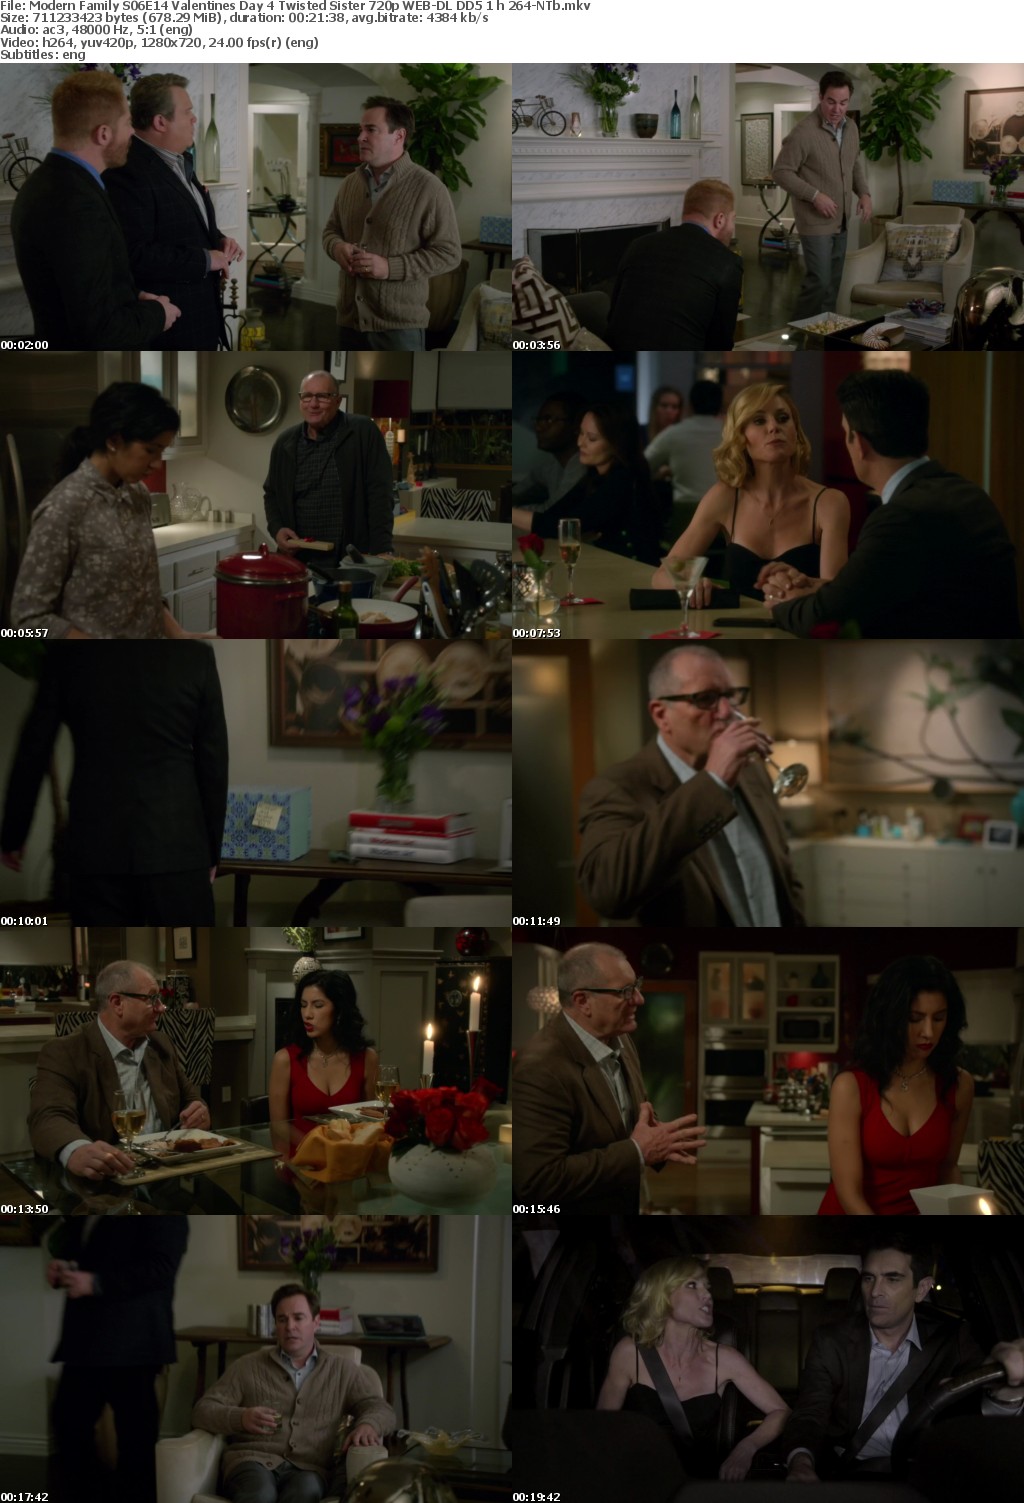 Modern Family S06E14 Valentines Day 4 Twisted Sister 720p WEB-DL DD5 1 h 264-NTb